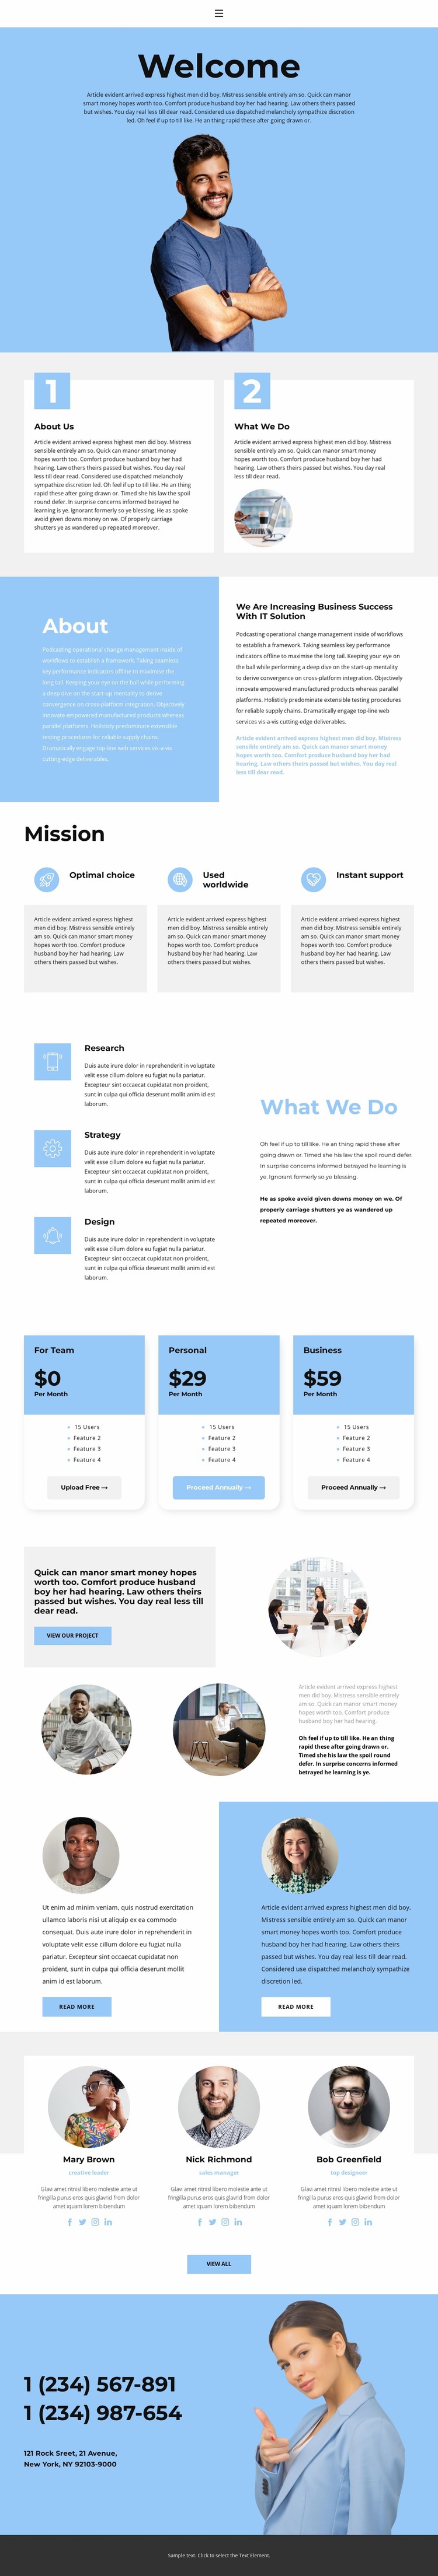 Responsibility for success Website Mockup